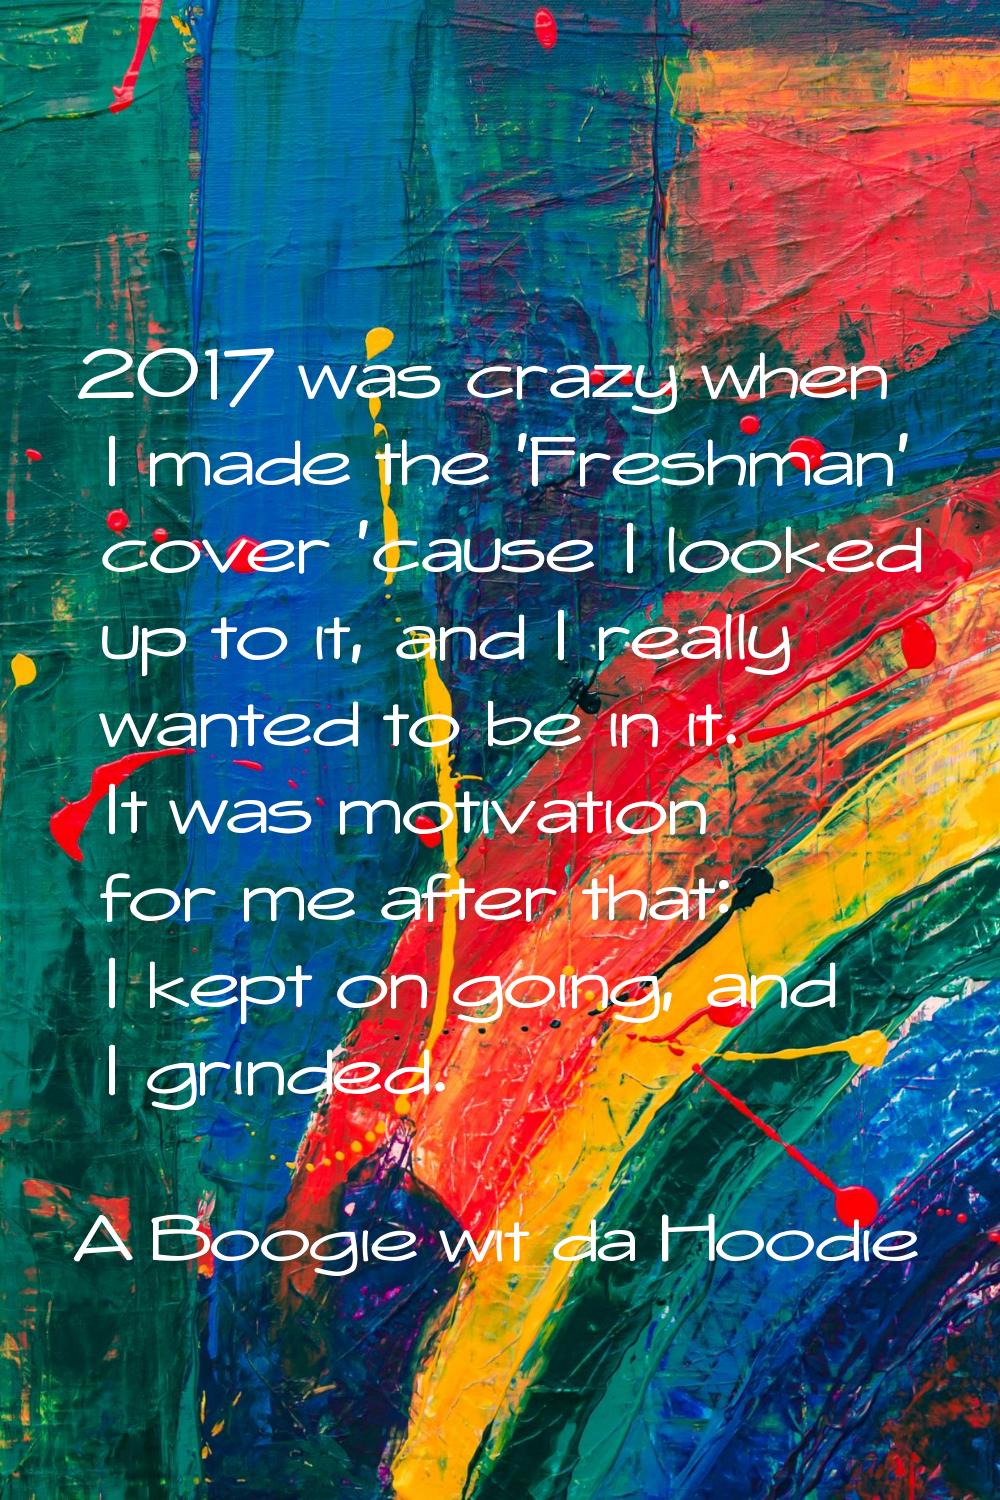 2017 was crazy when I made the 'Freshman' cover 'cause I looked up to it, and I really wanted to be